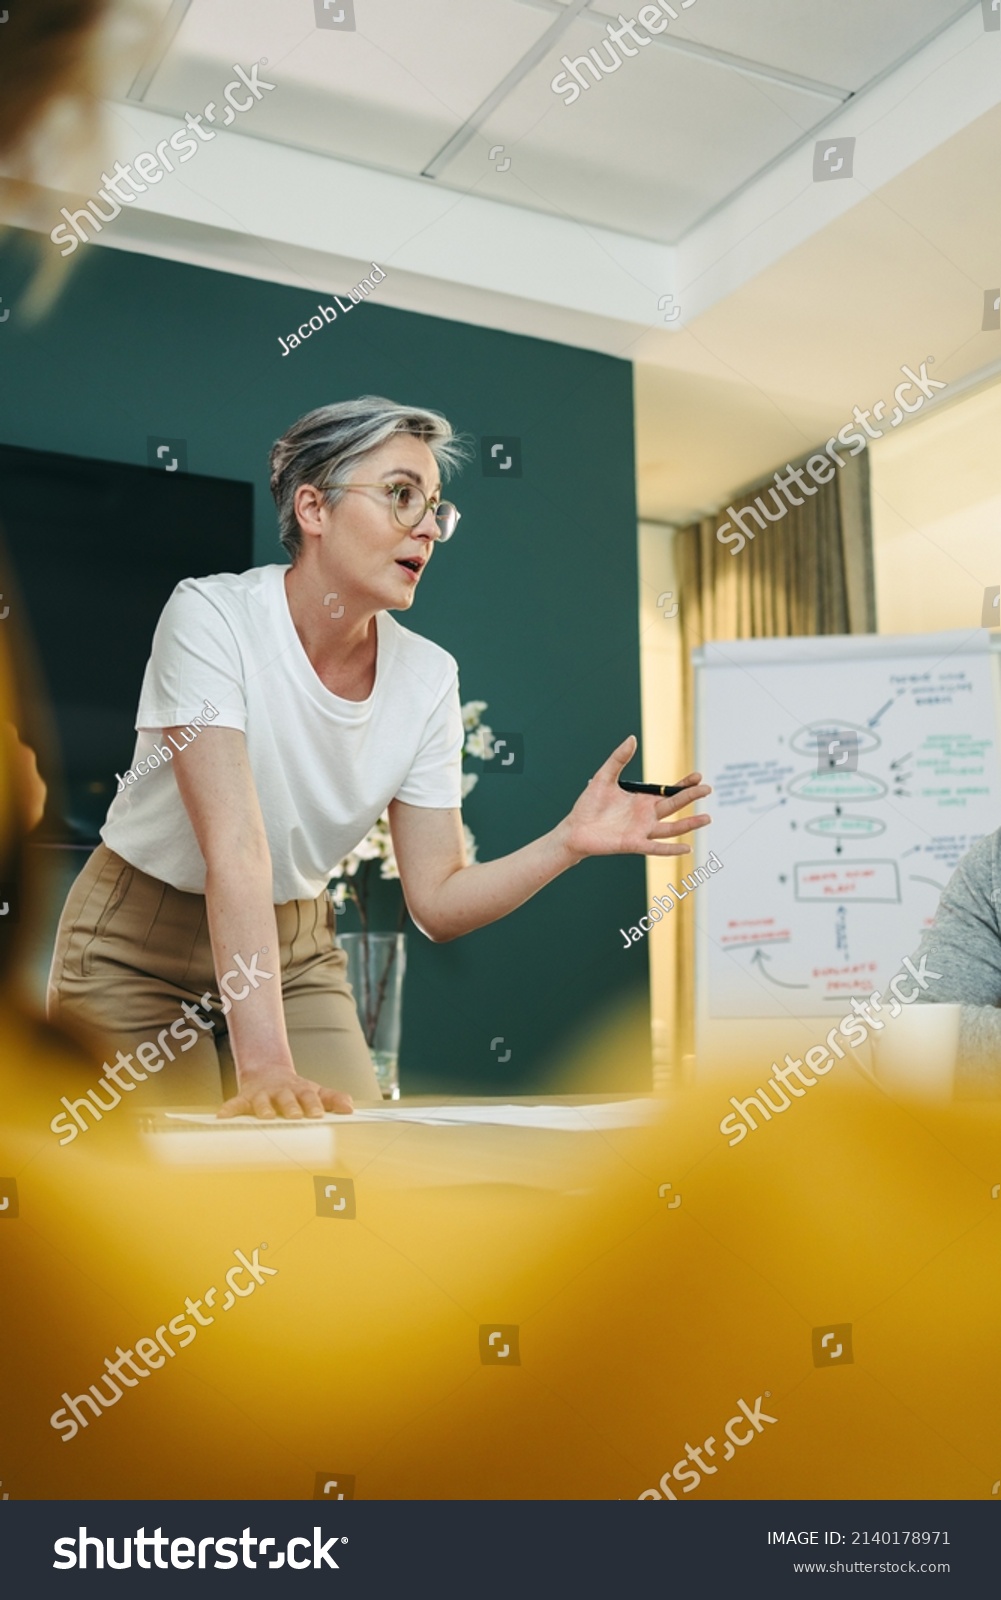 Experienced business professional leading a discussion with her team in a boardroom. Businesspeople sharing creative ideas during a meeting in a modern workplace. #2140178971